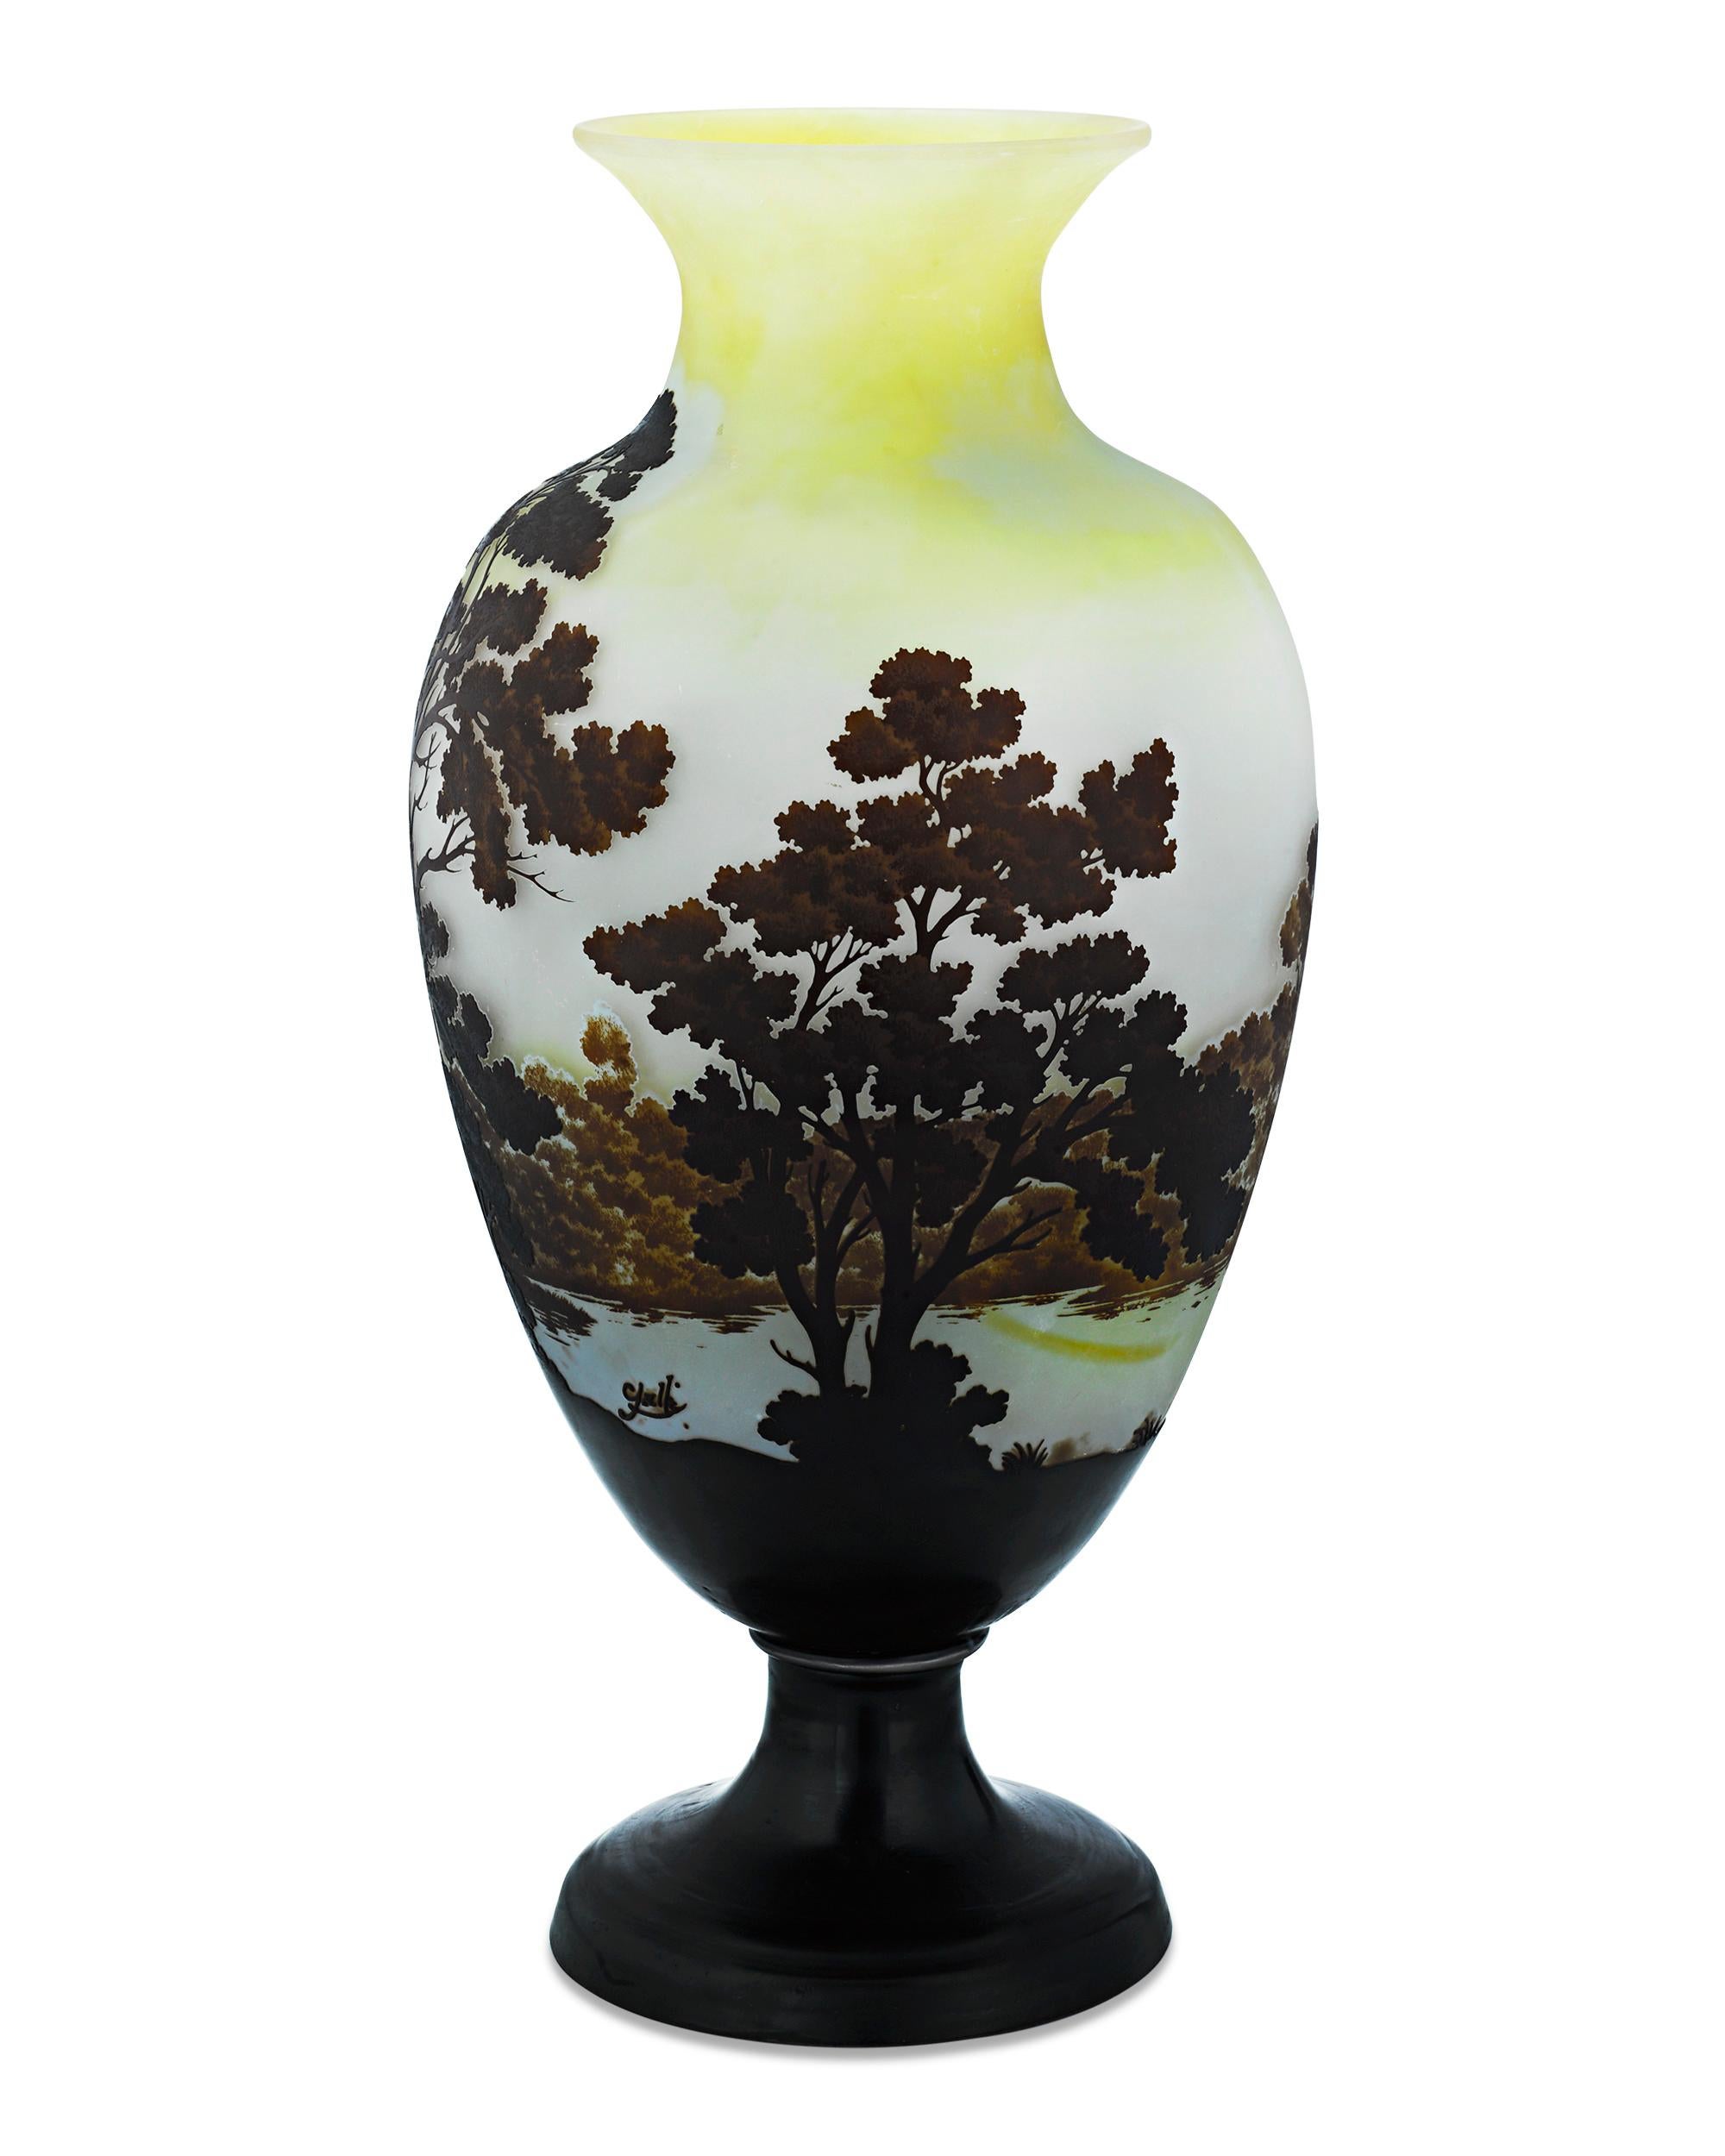 This exceptional cameo art glass vase is the work of the famed Art Nouveau master Emile Gallé. The artist's love of nature is evident in this naturalistic wooded landscape scene set in a sundown yellow backdrop. The Gallé cameo signature is set